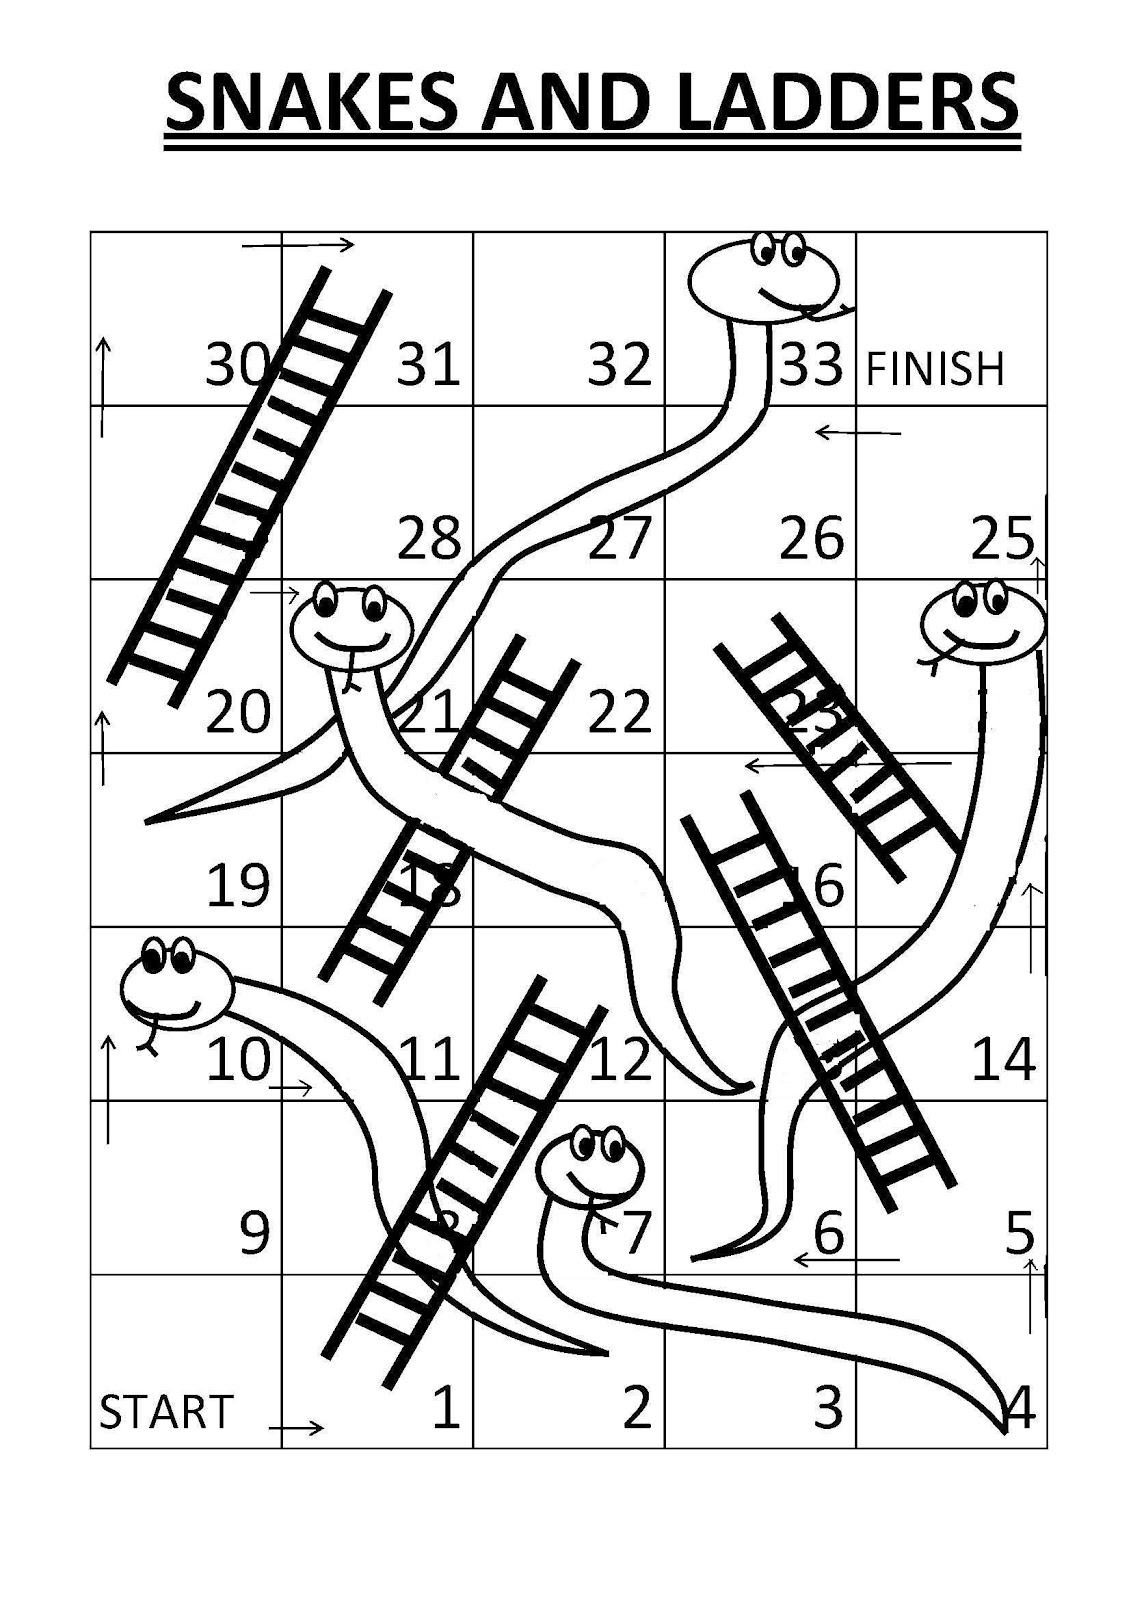 Snakes and Ladders Board Game ESL